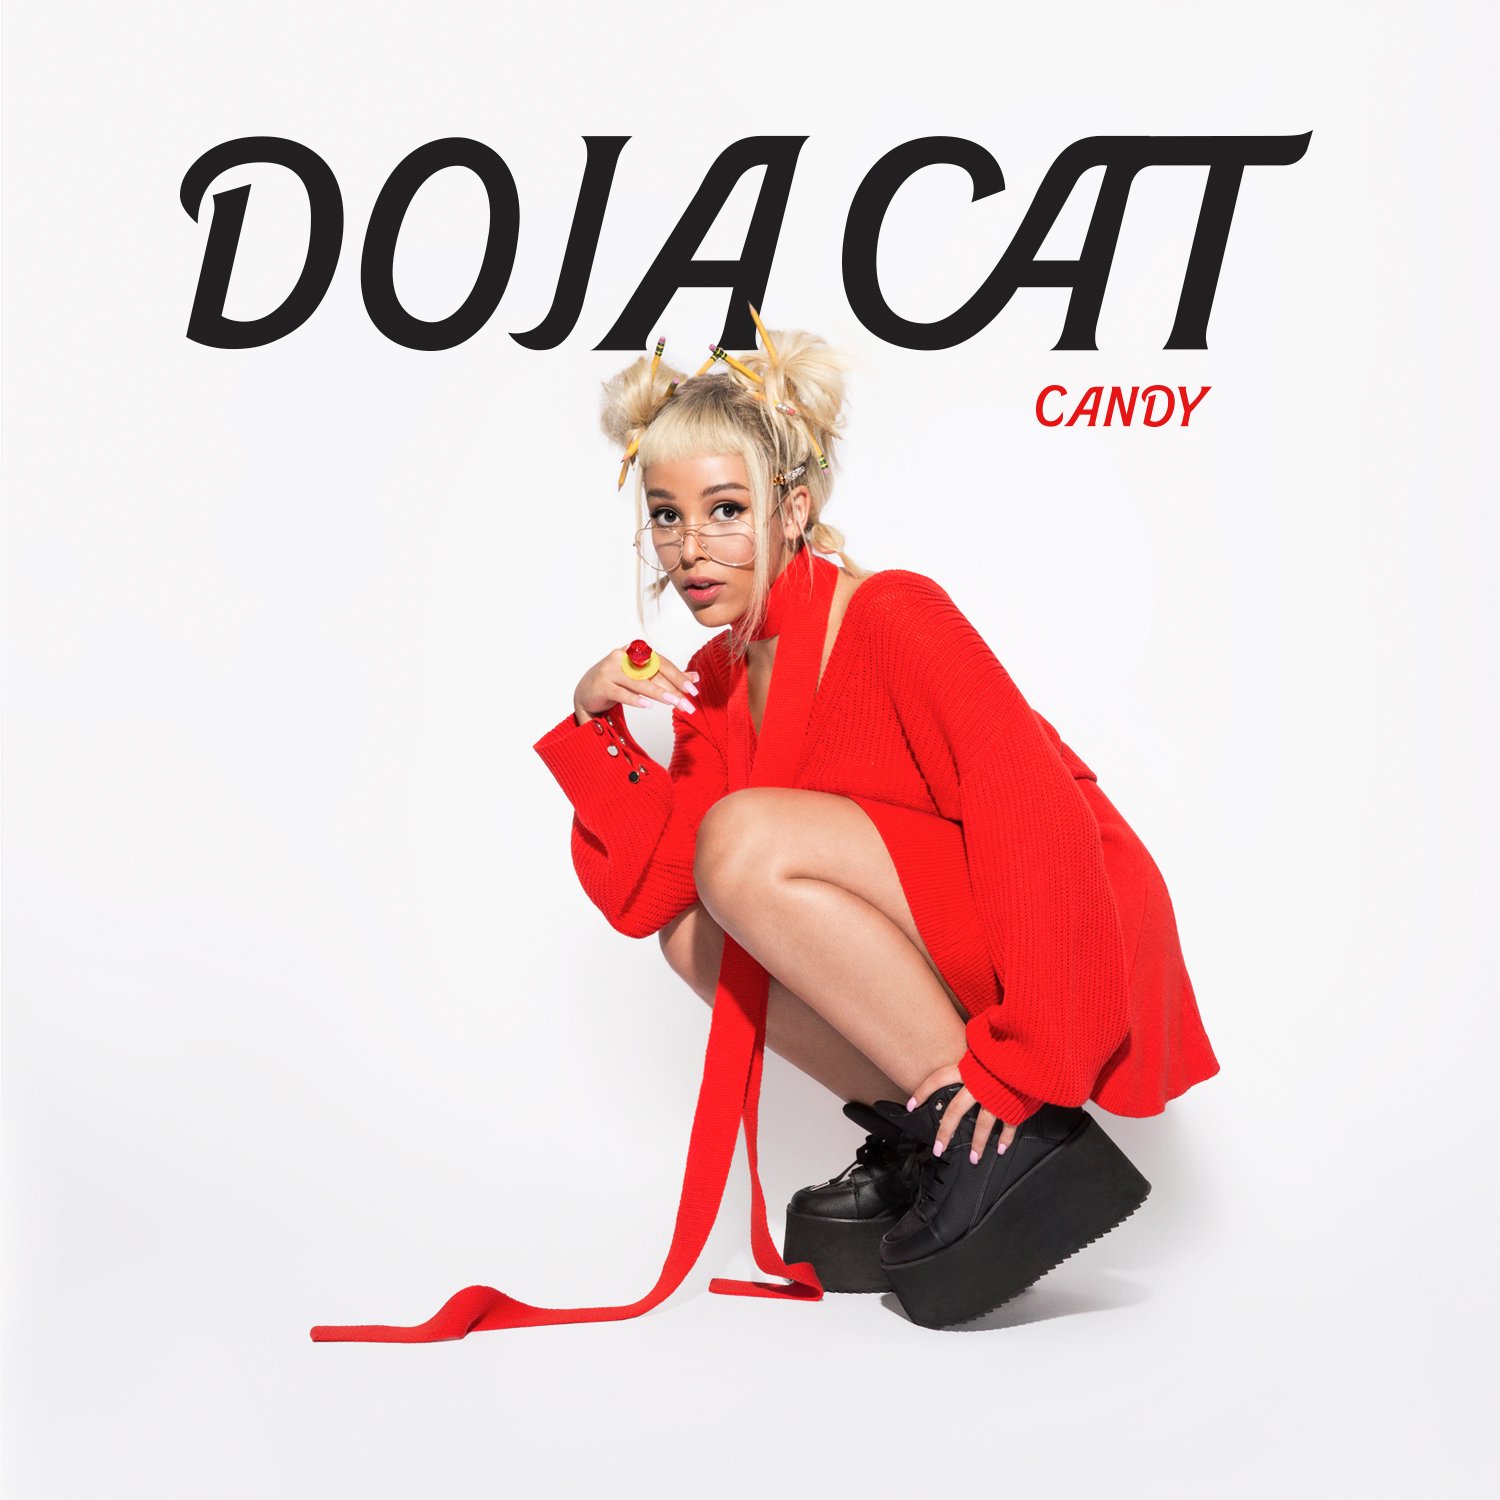 Doja Cat Releases New Track "Candy" From Her Debut Album